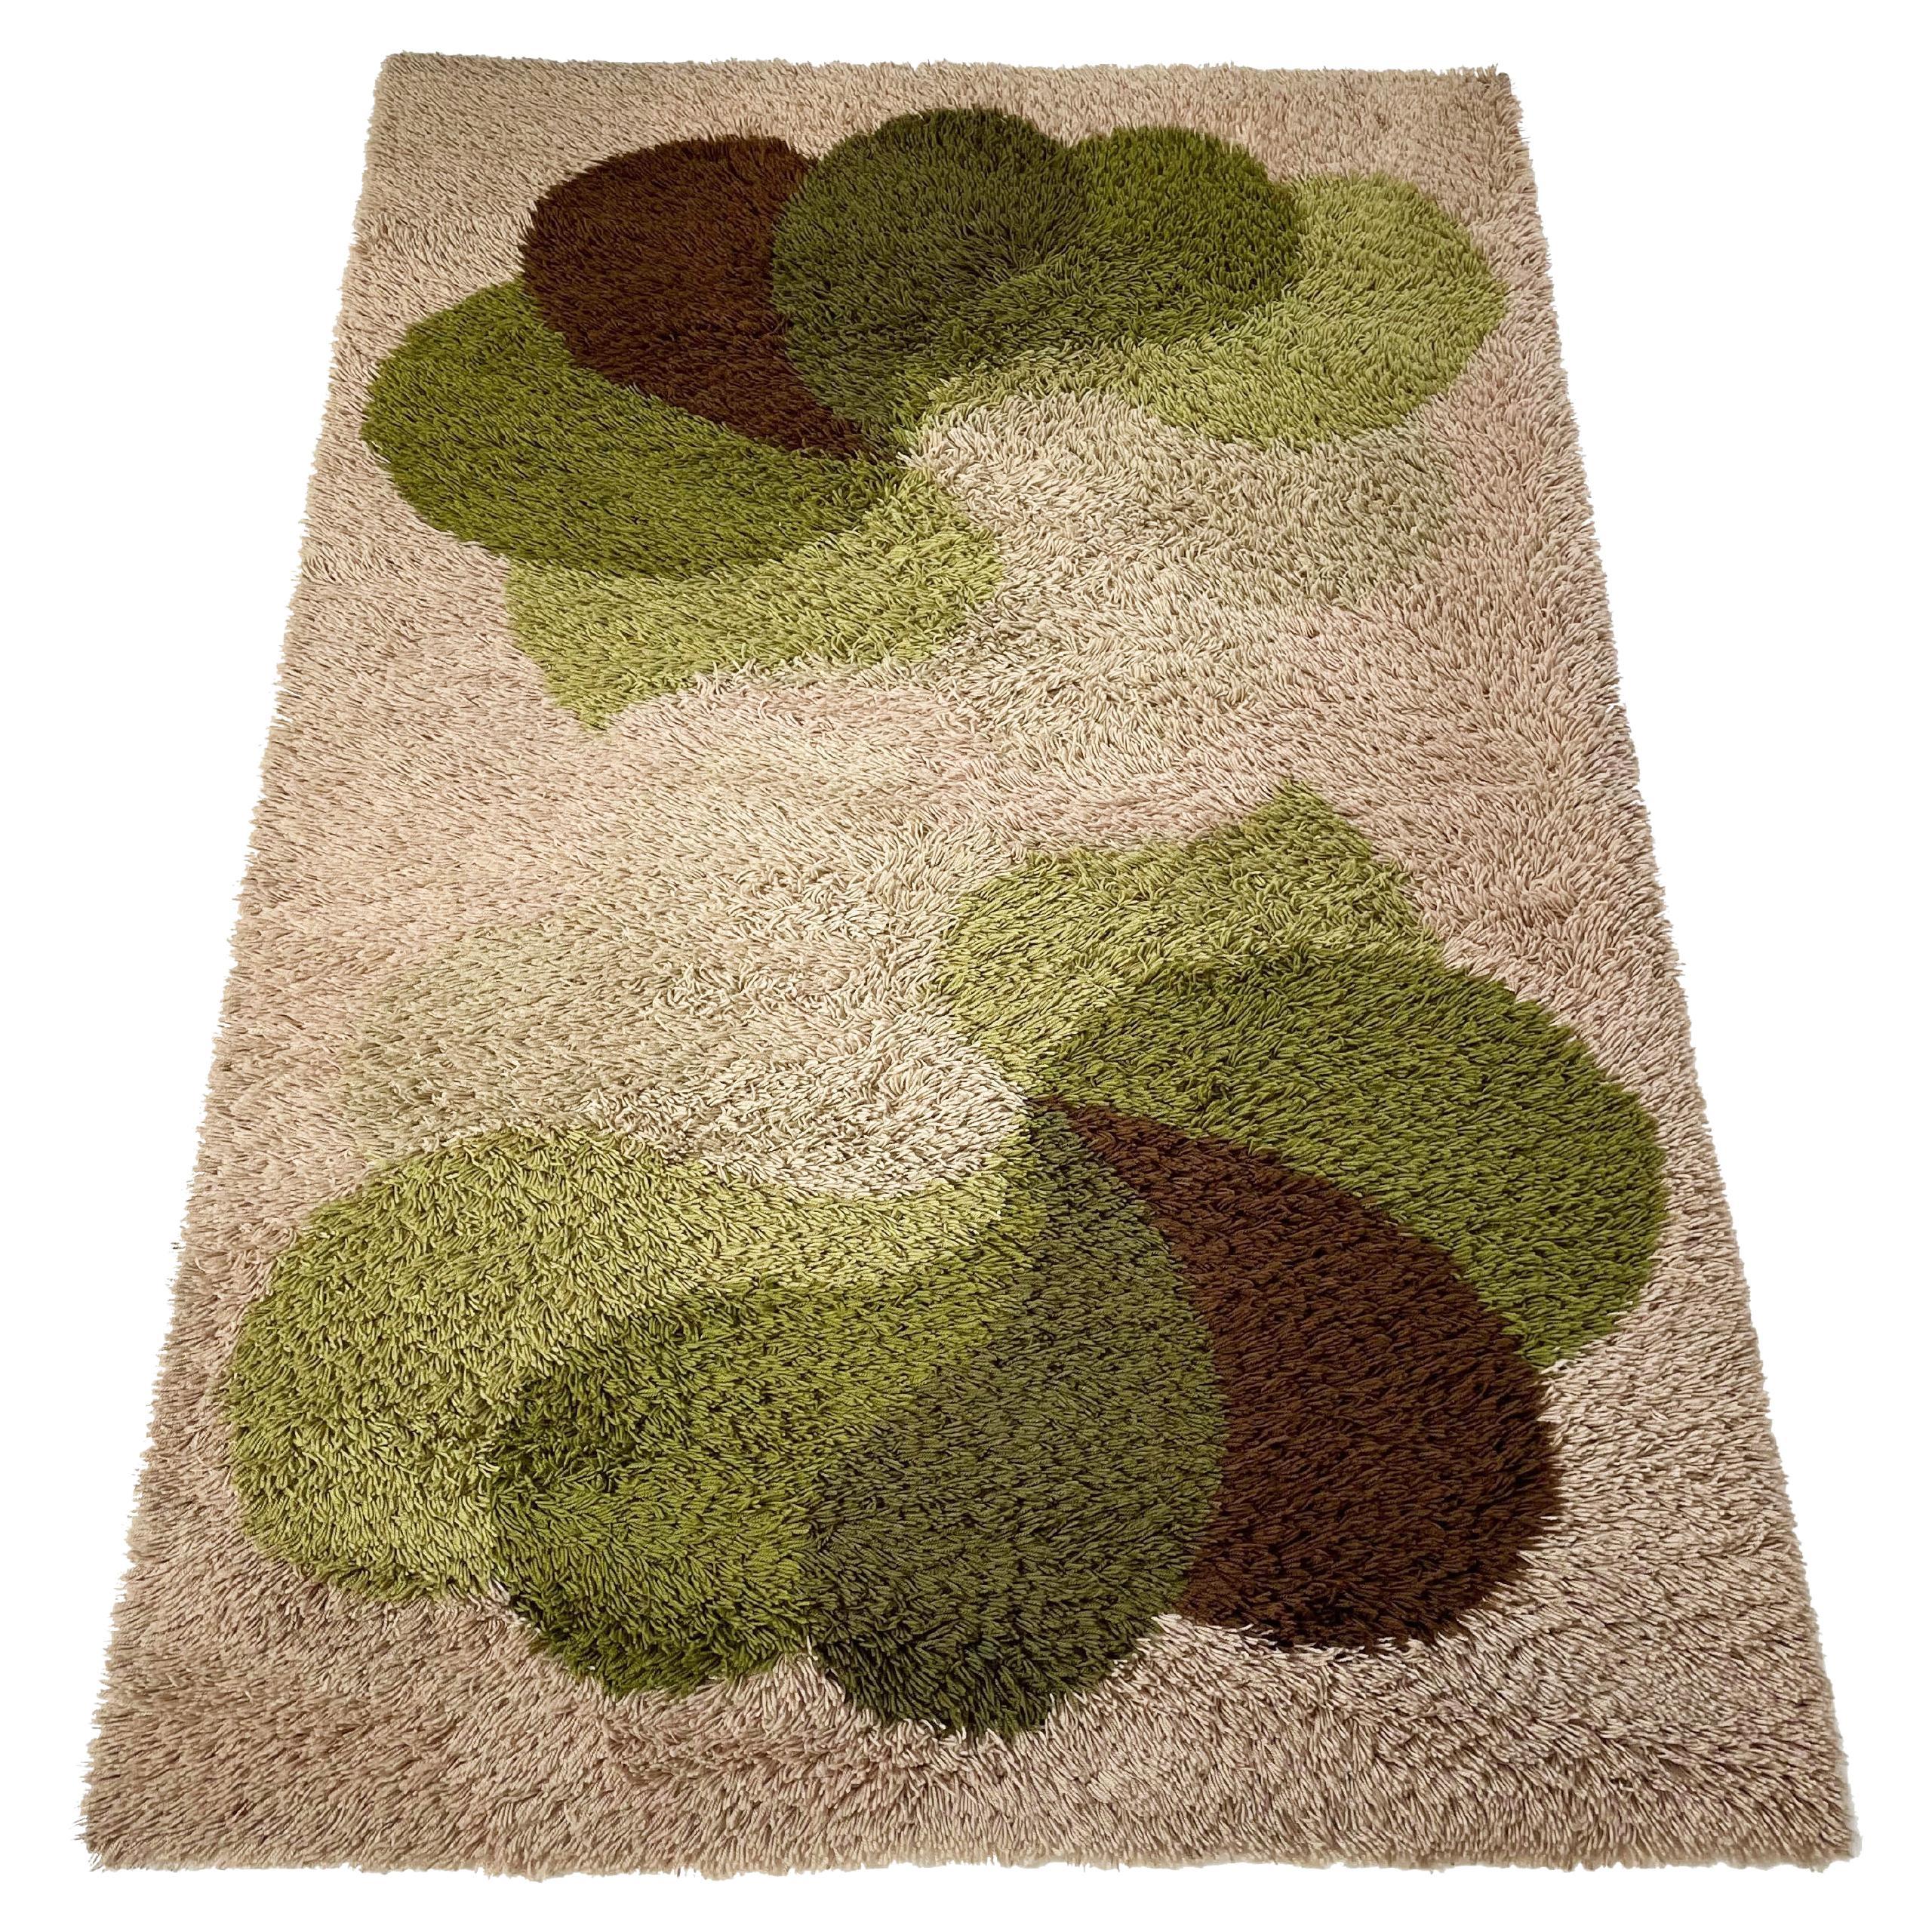 Large Panton Style Multi-Color High Pile Rya Rug by Desso Netherlands, 1970s For Sale